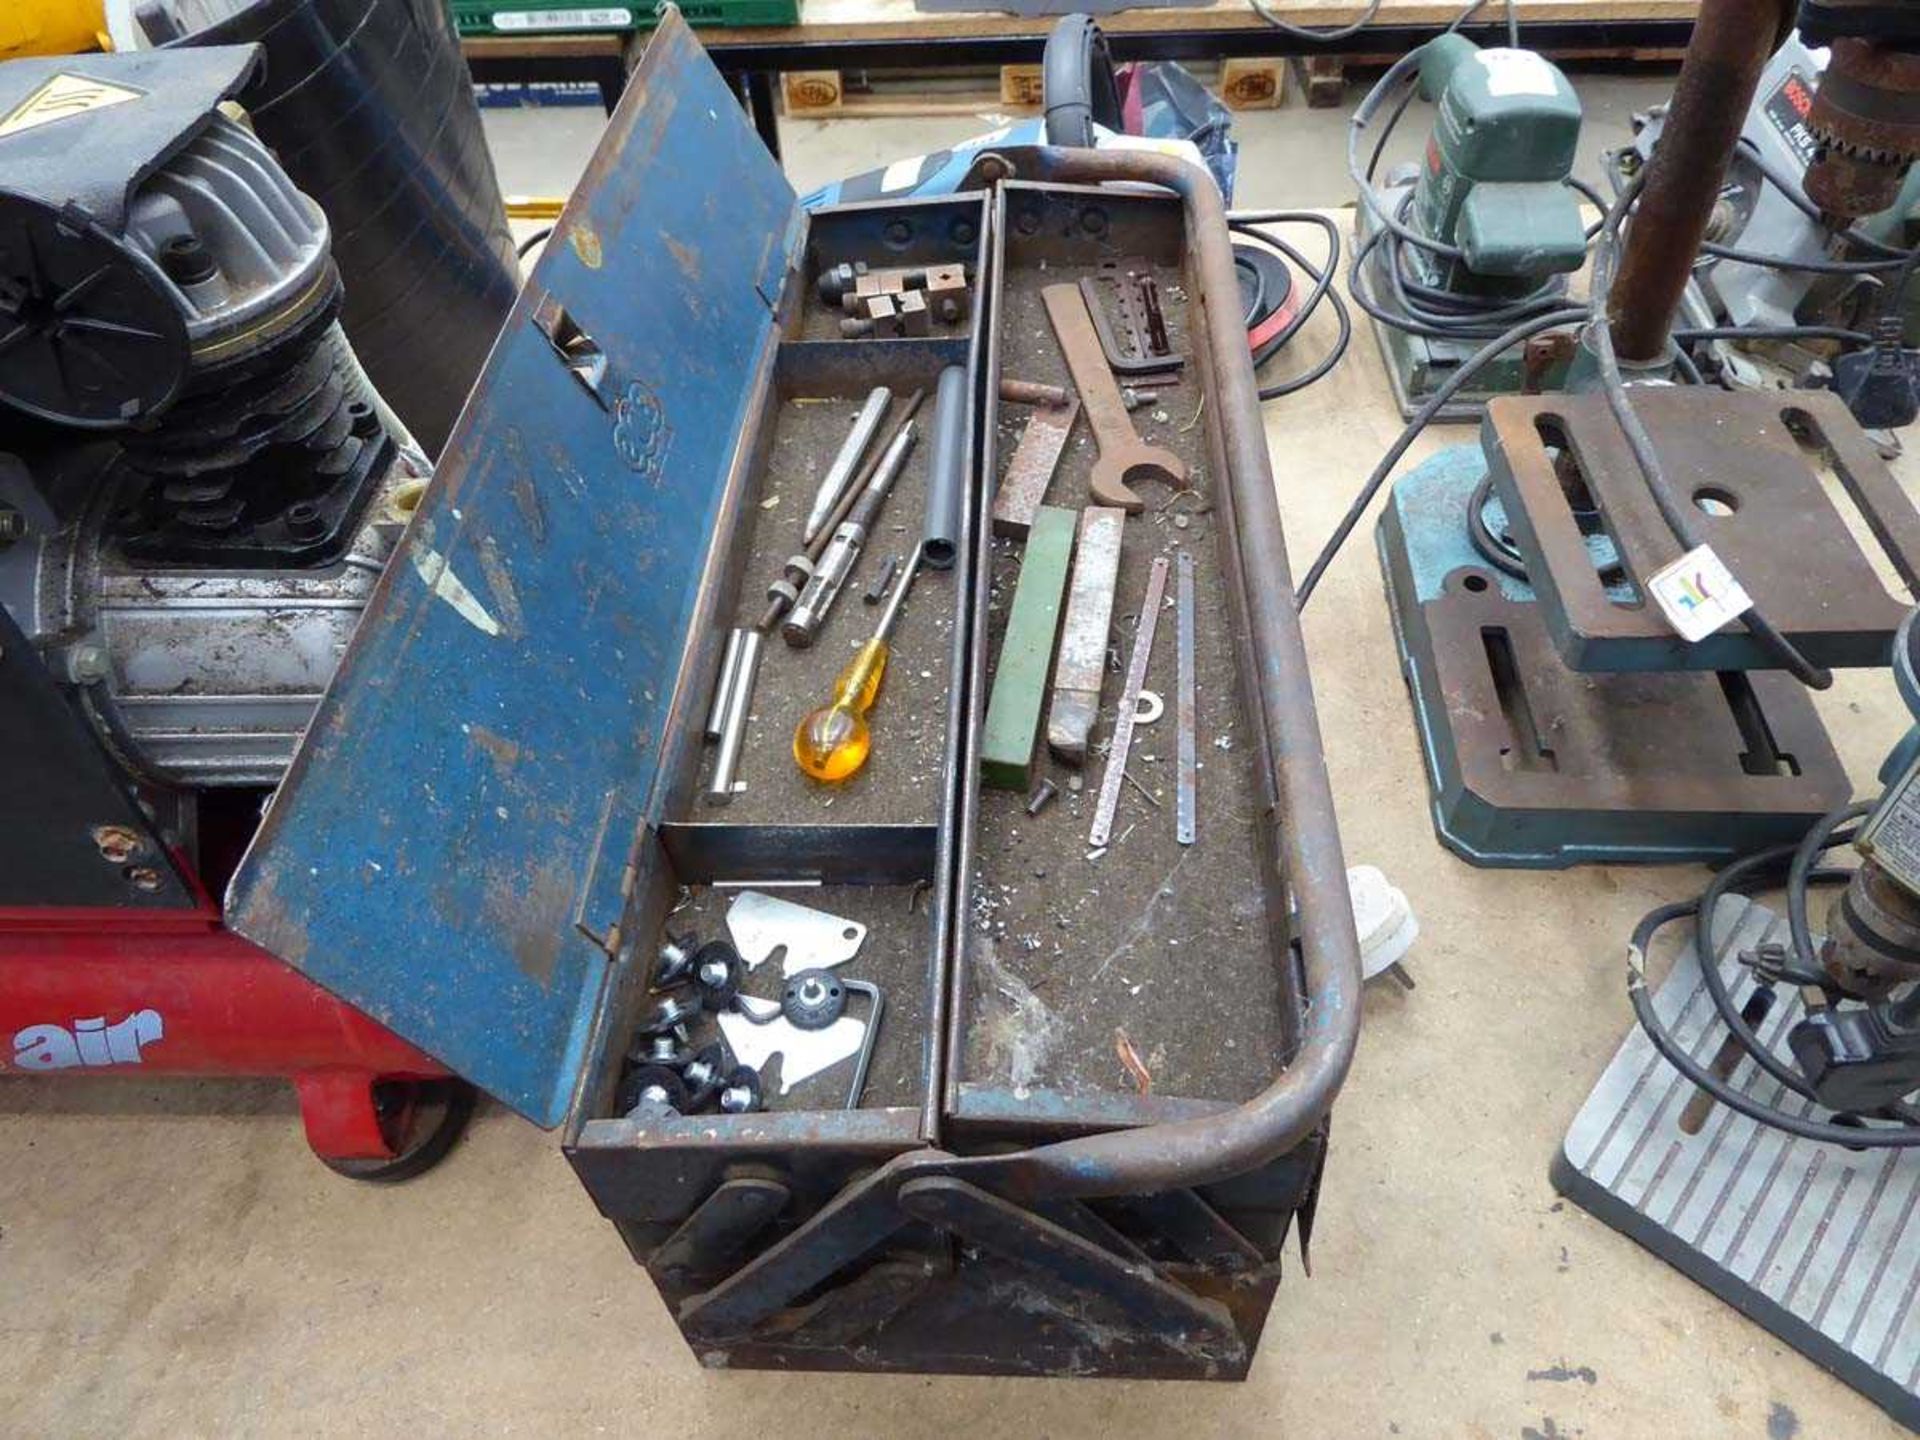 Cantilever tool box with assortment of small tools